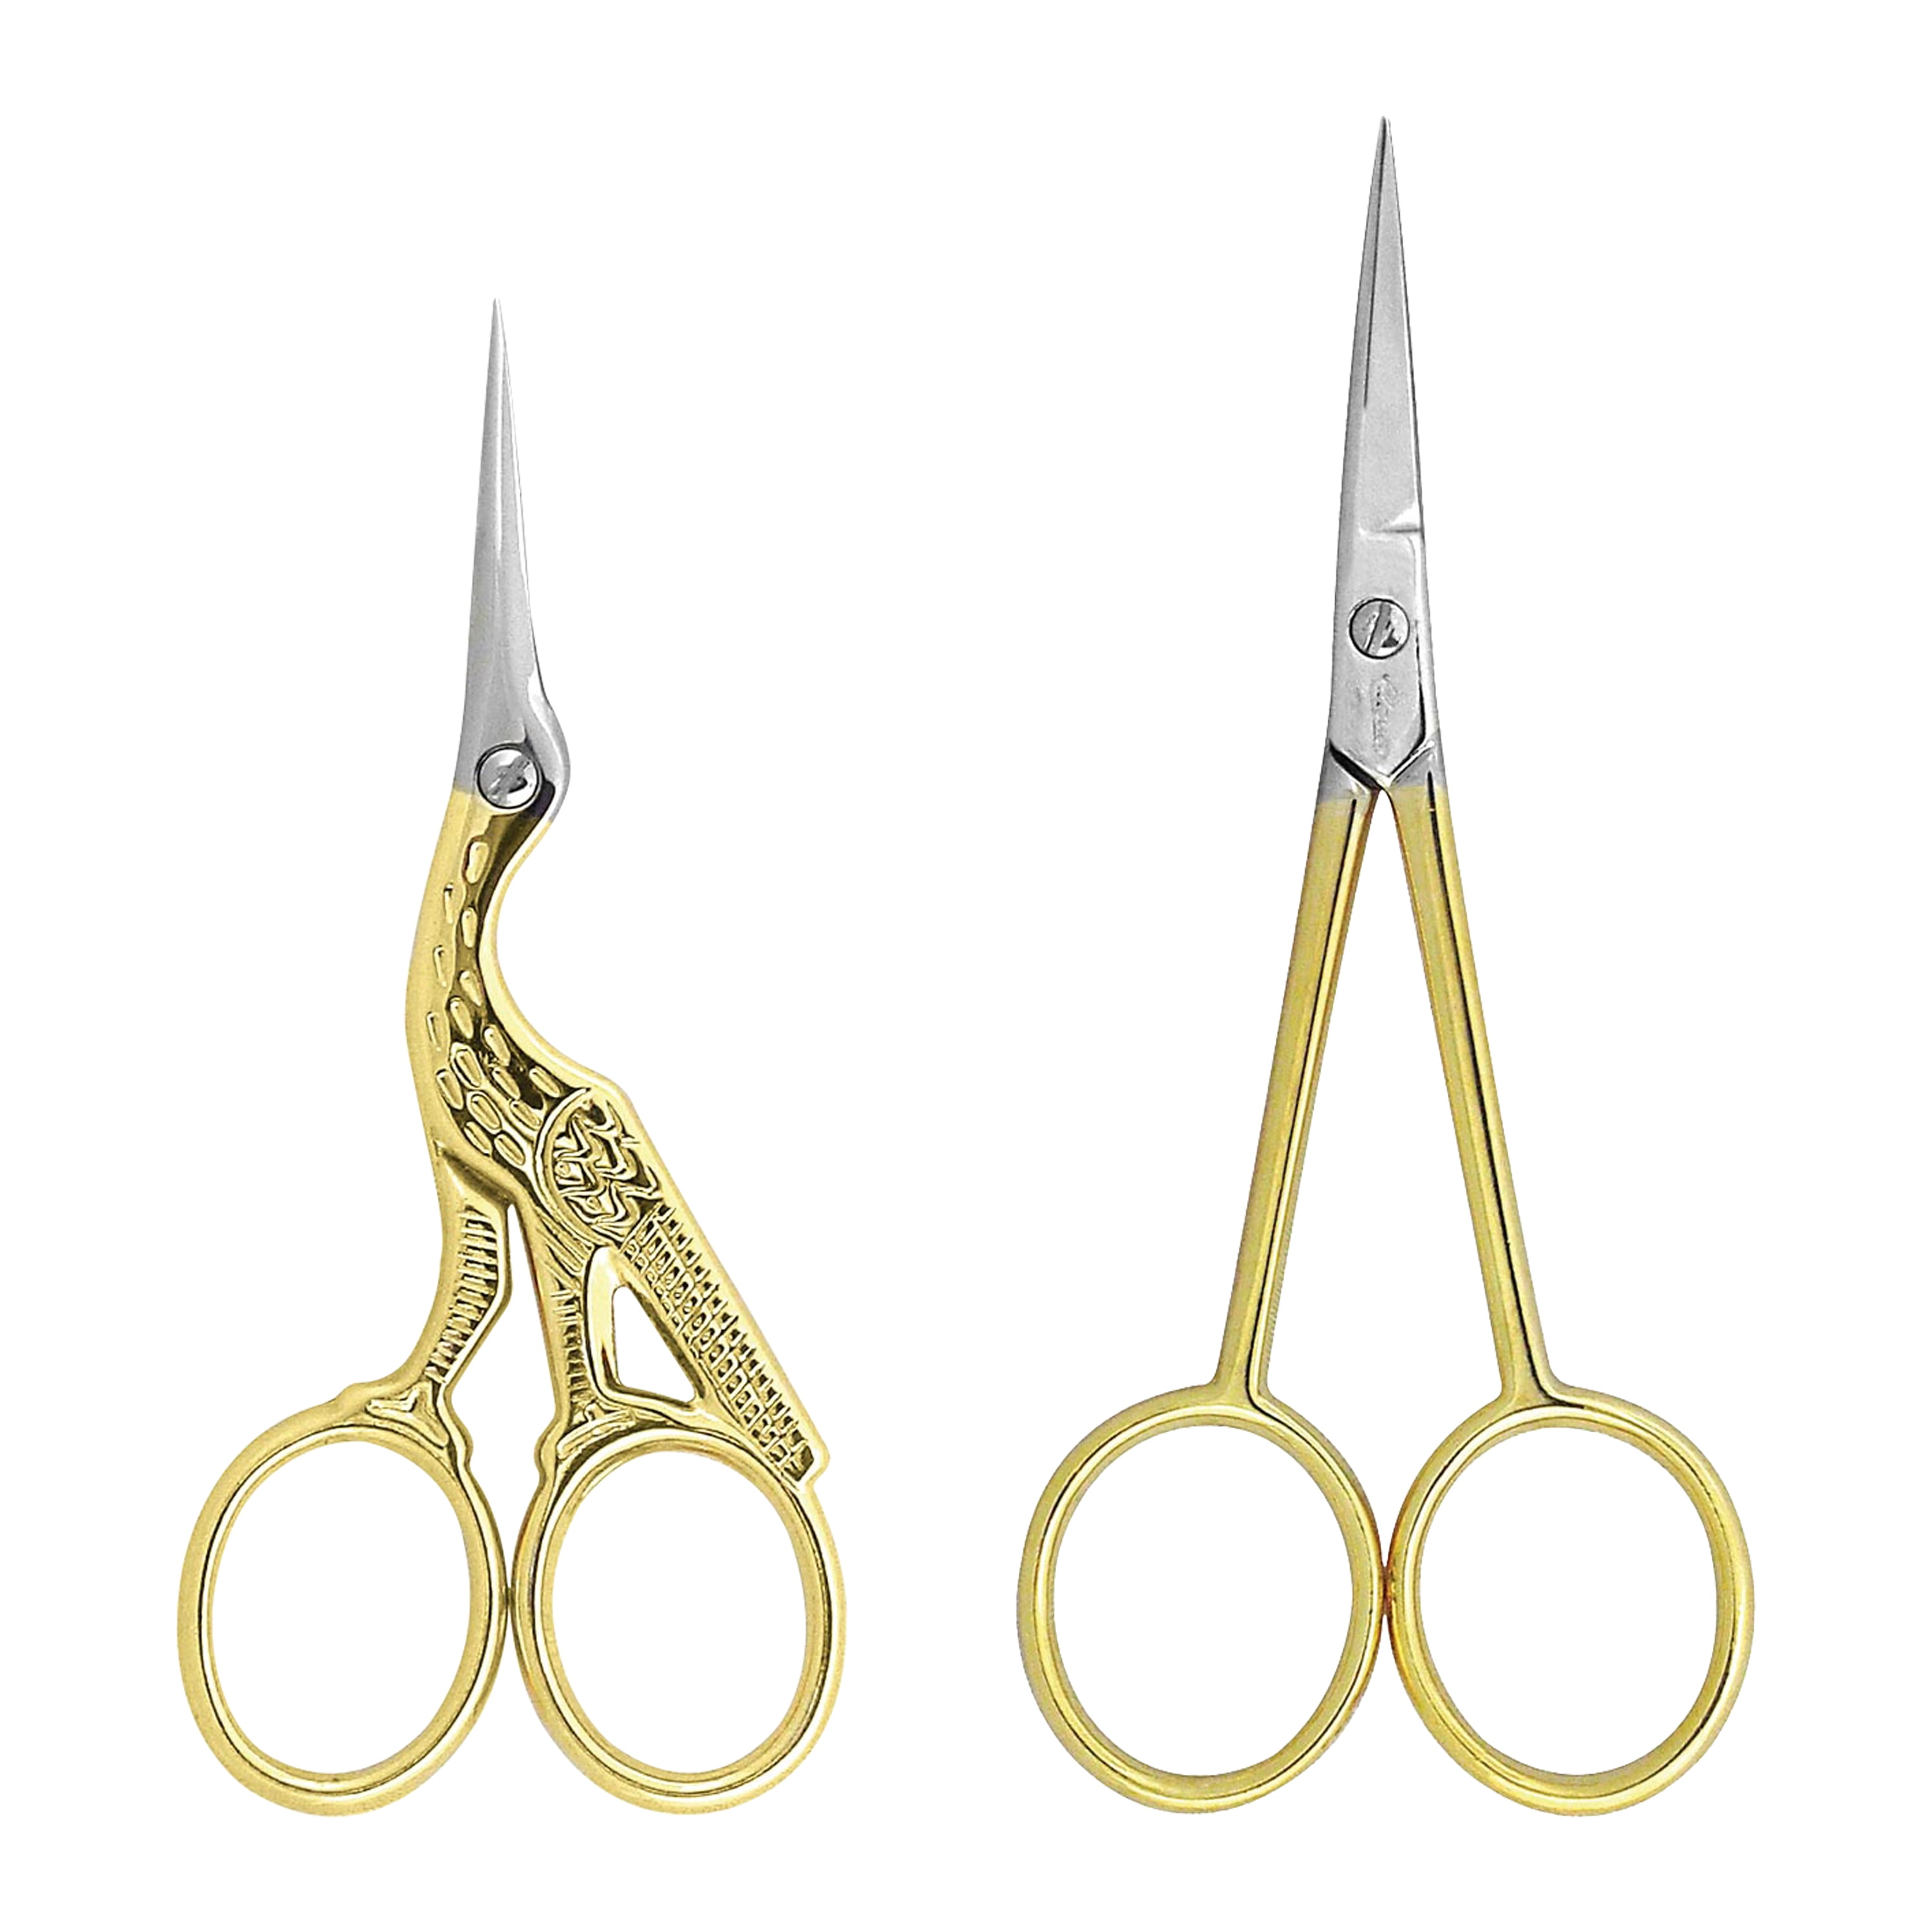 New 12 pcs Stork Sewing Embroidery ManiCure Scissors Gold Plated 3.5" Bird Shape